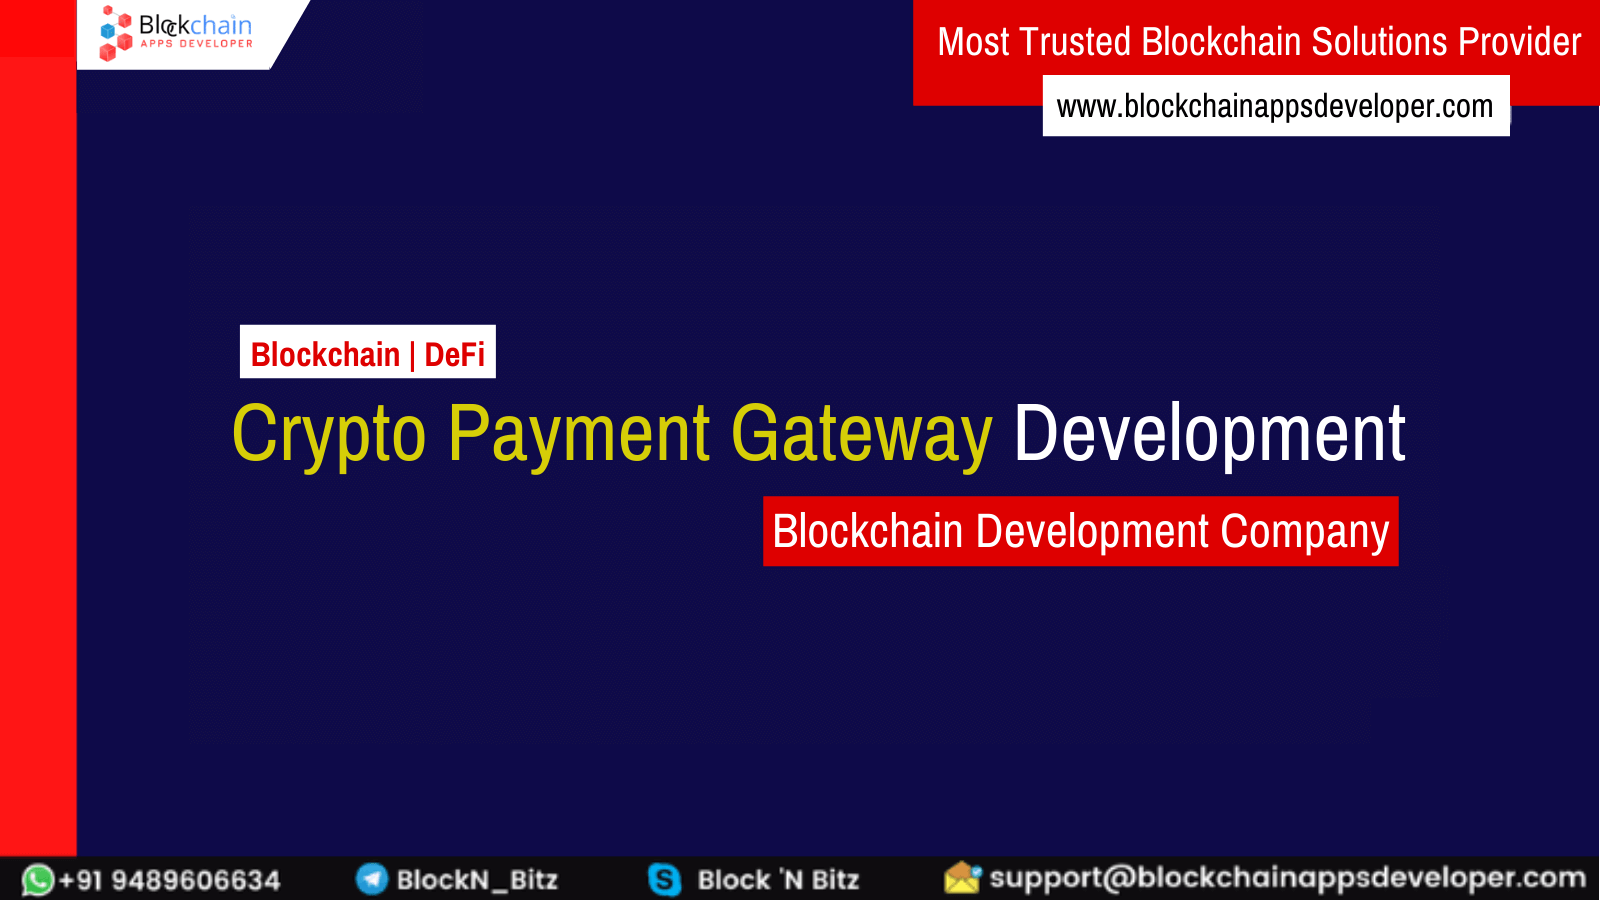 Cryptocurrency Payment Gateway Development Services Company